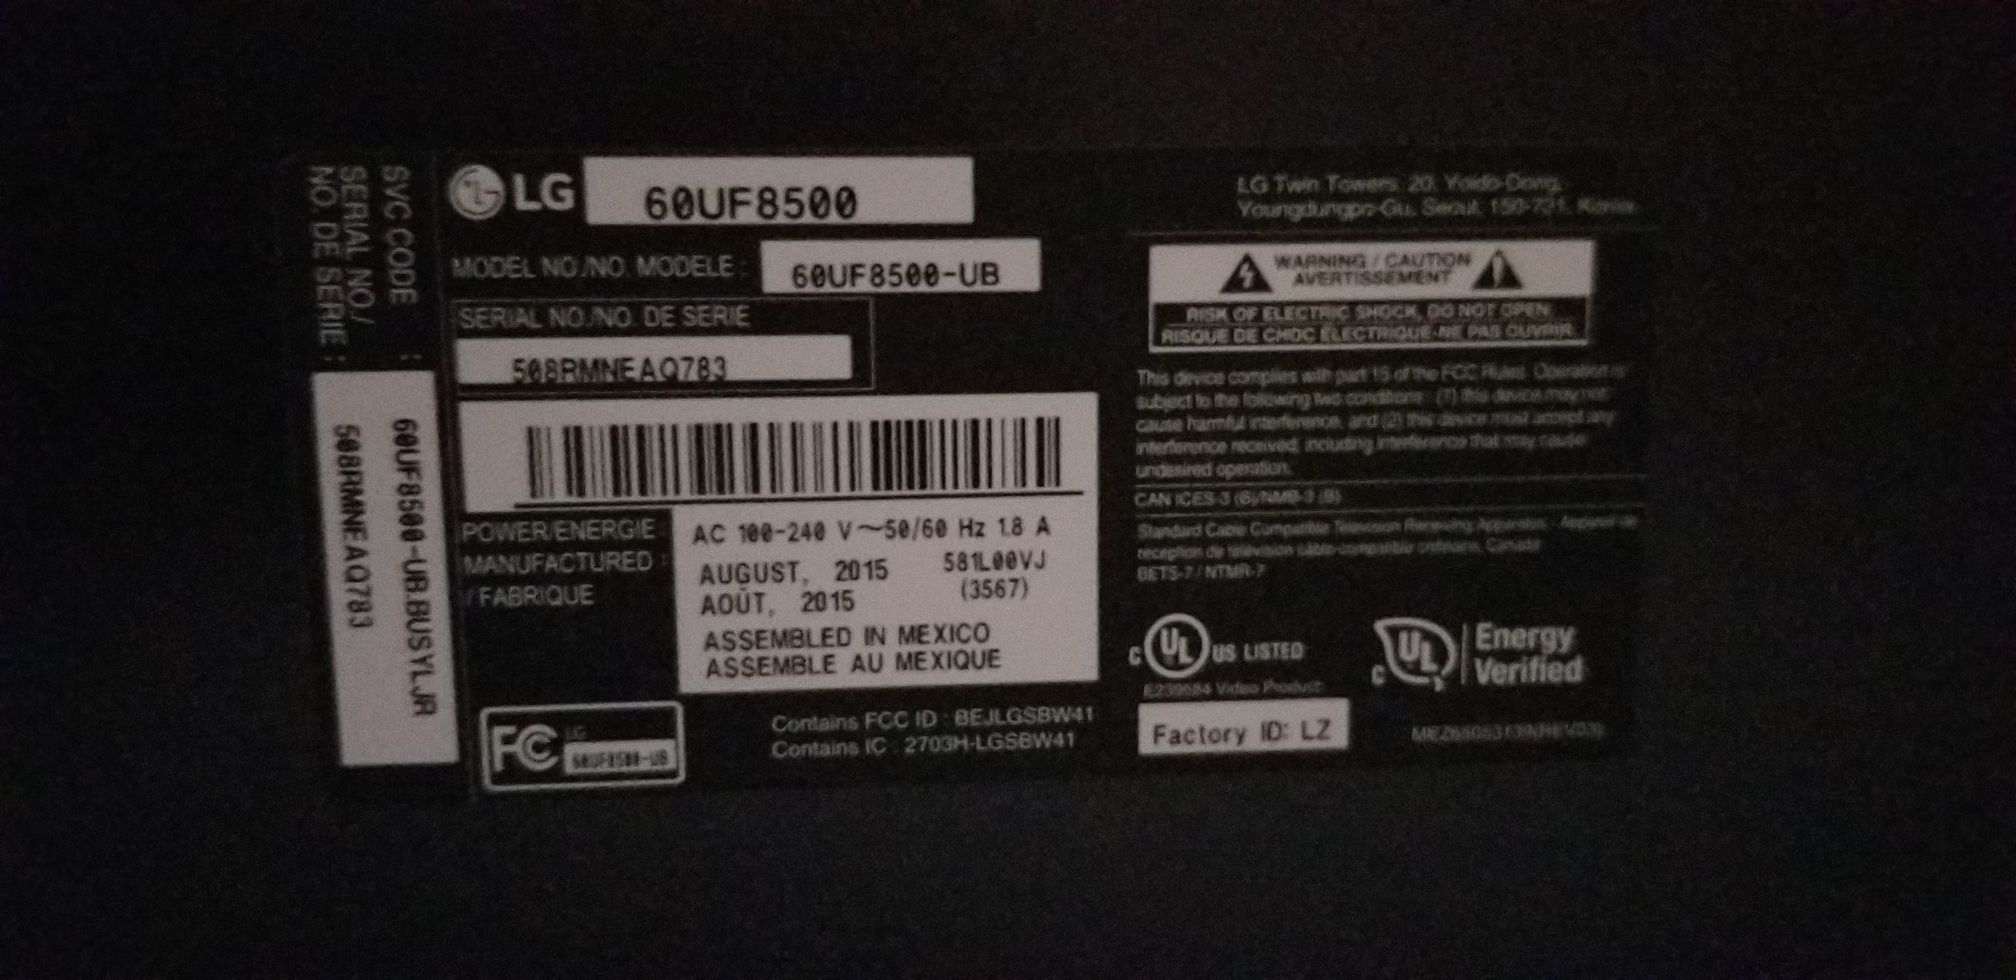 60 inch LG TV Model # 60UF8500 2015. 3 HDMI INPUTS 3 USB INPUTS LIKE NEW CONDITION. HAVE REMOTE.